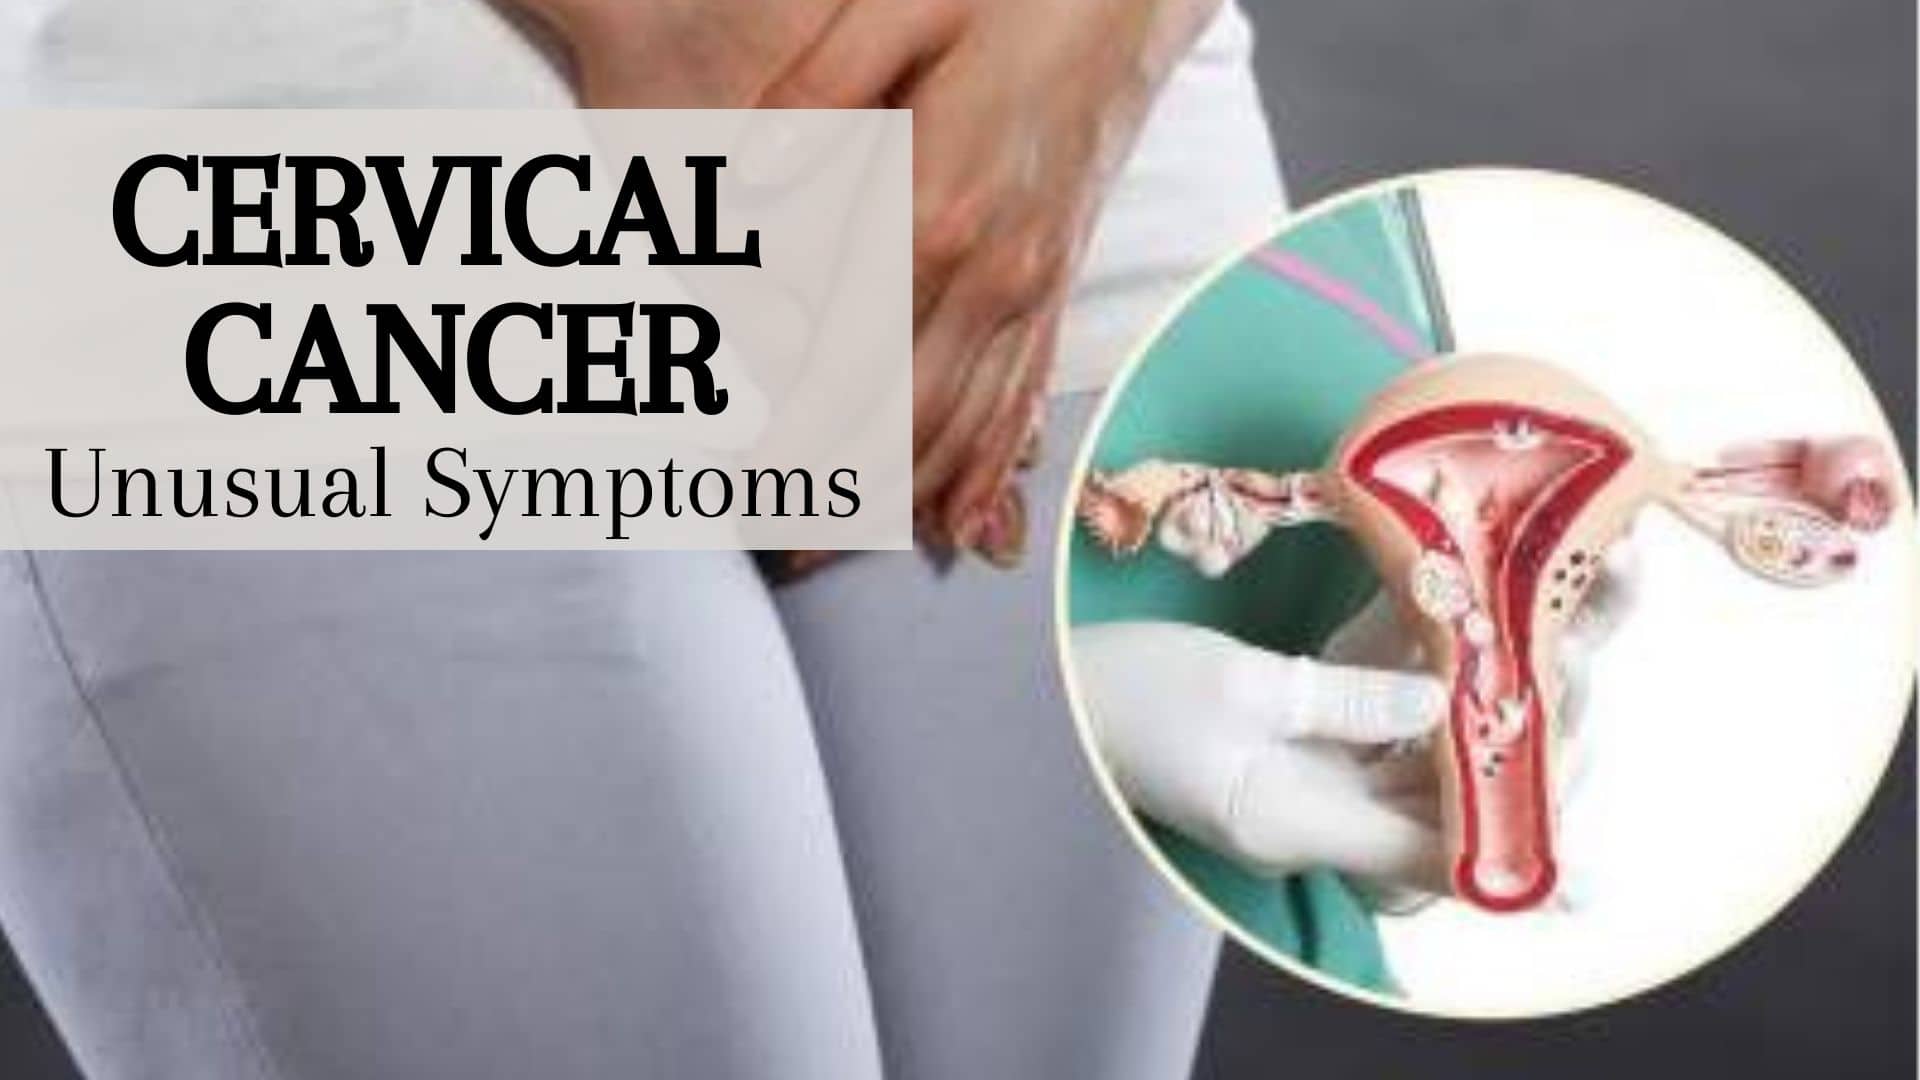 SGO on X: Signs of #VaginalCancer include unusual vaginal bleeding,  bleeding after vaginal sex, pain, problems with urination or bowel  movements, a watery discharge, or a lump or mass in the vagina.